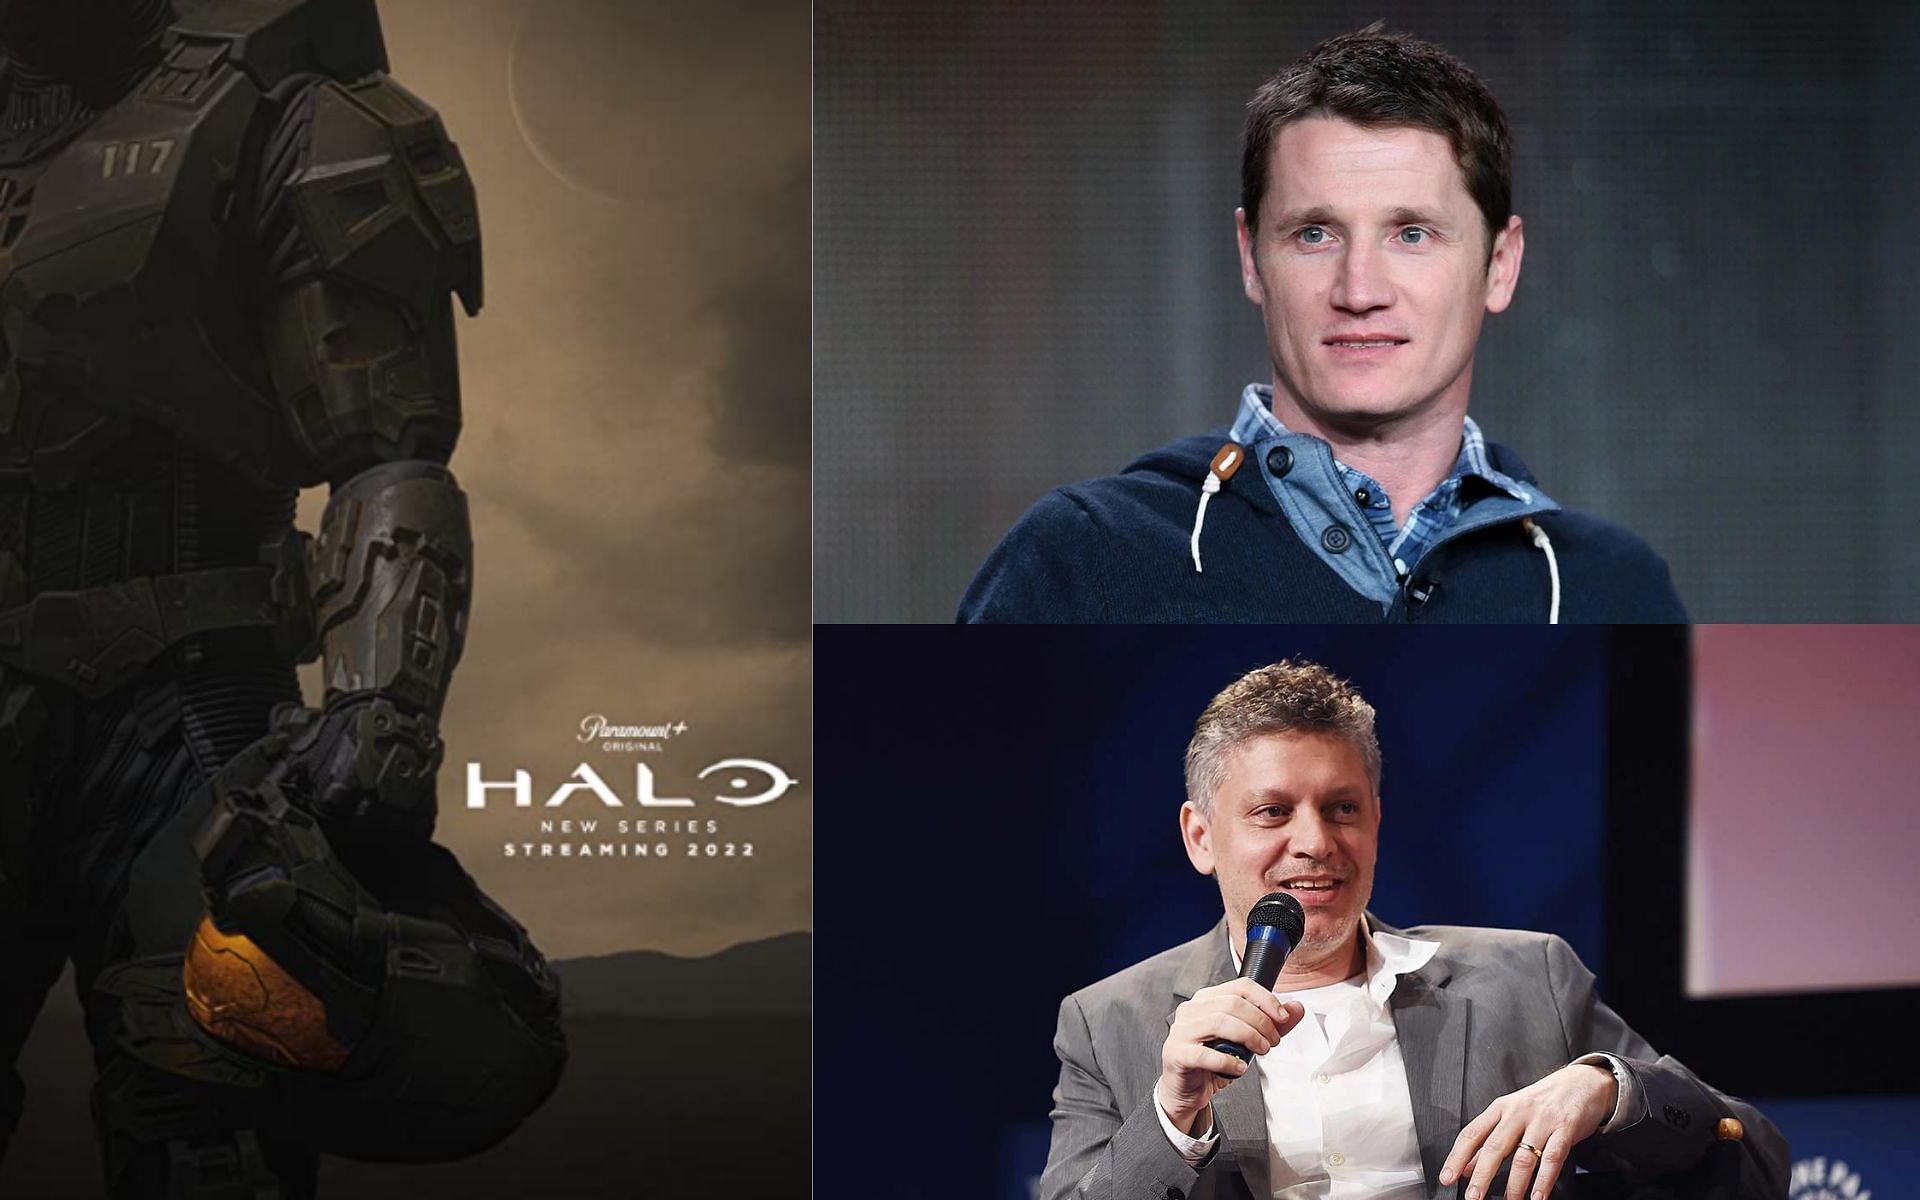 Halo episode count and 2022 Paramount+ schedule